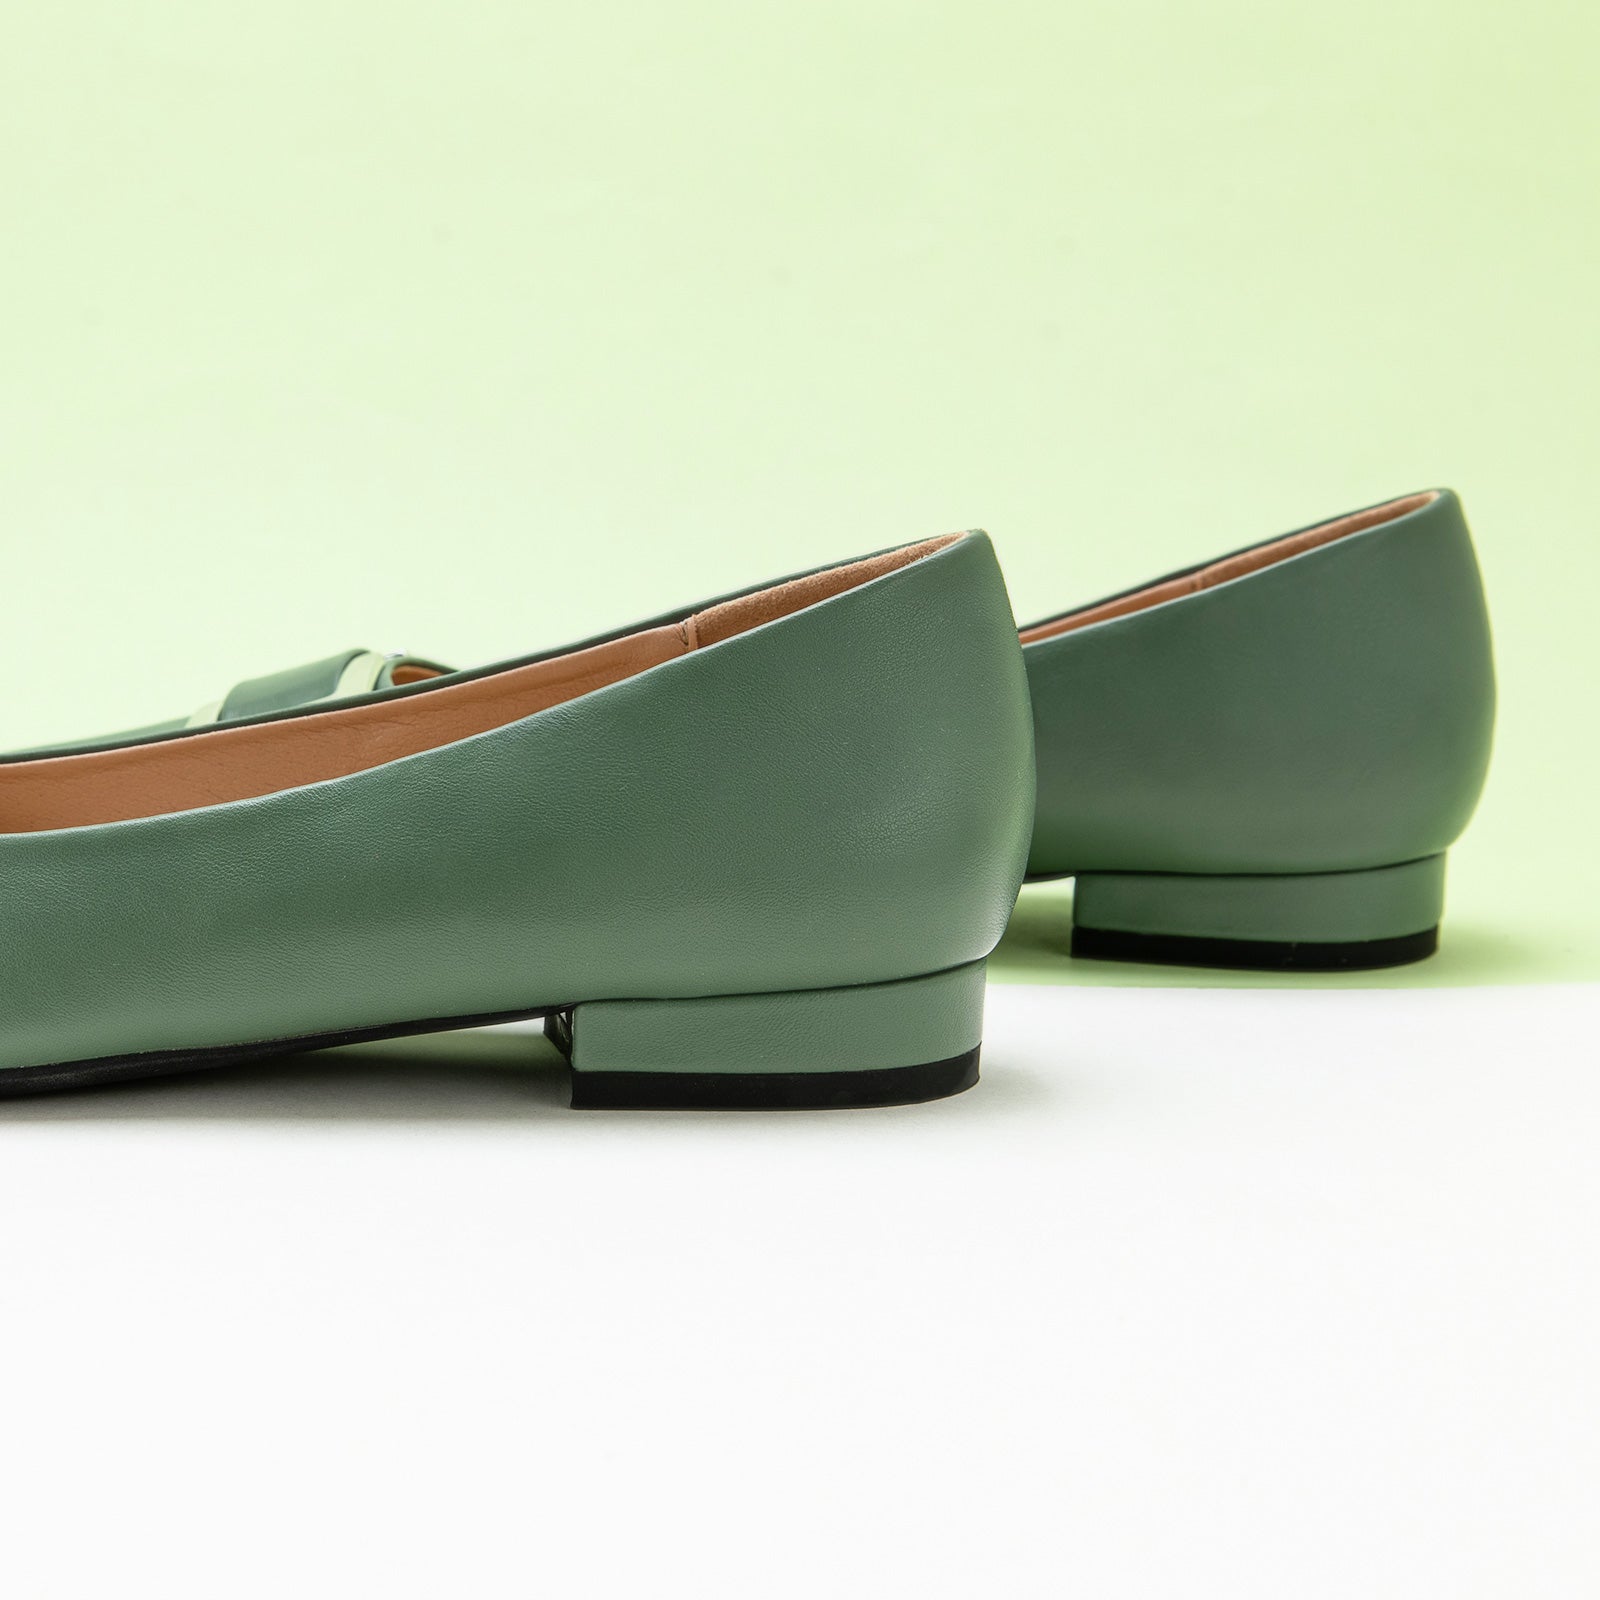 Green Flats with a stylish Metal Buckle and Pointed Toe, perfect for a confident and fashionable look in any urban setting.